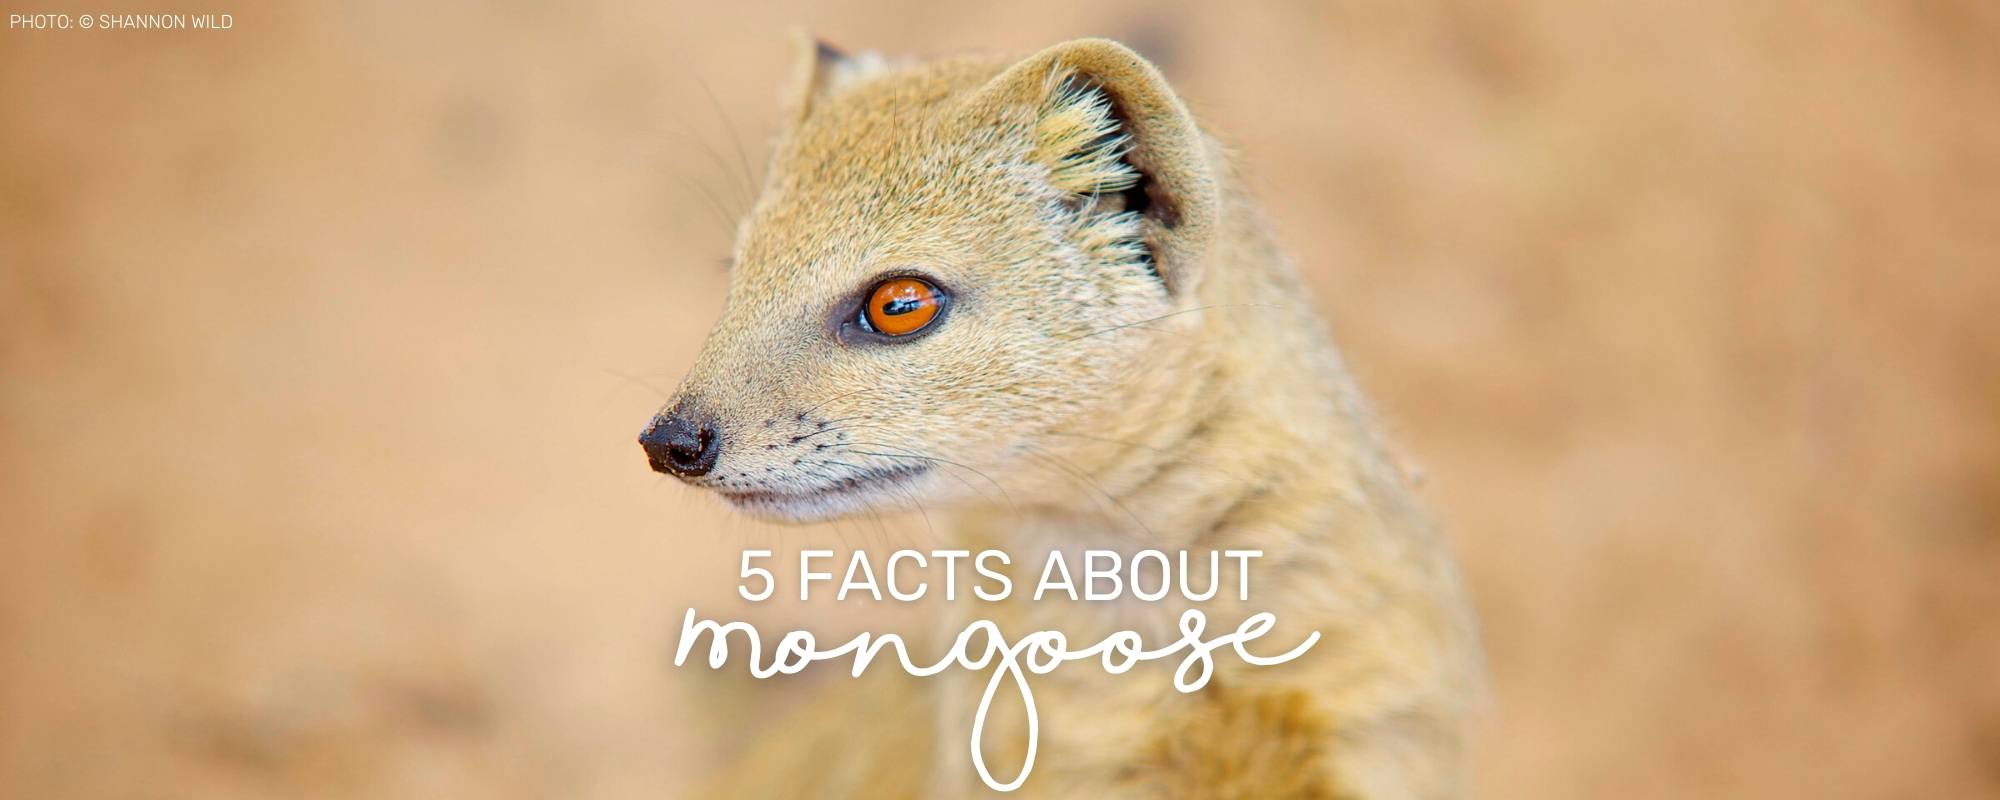 5 FURRY MONGOOSE FACTS